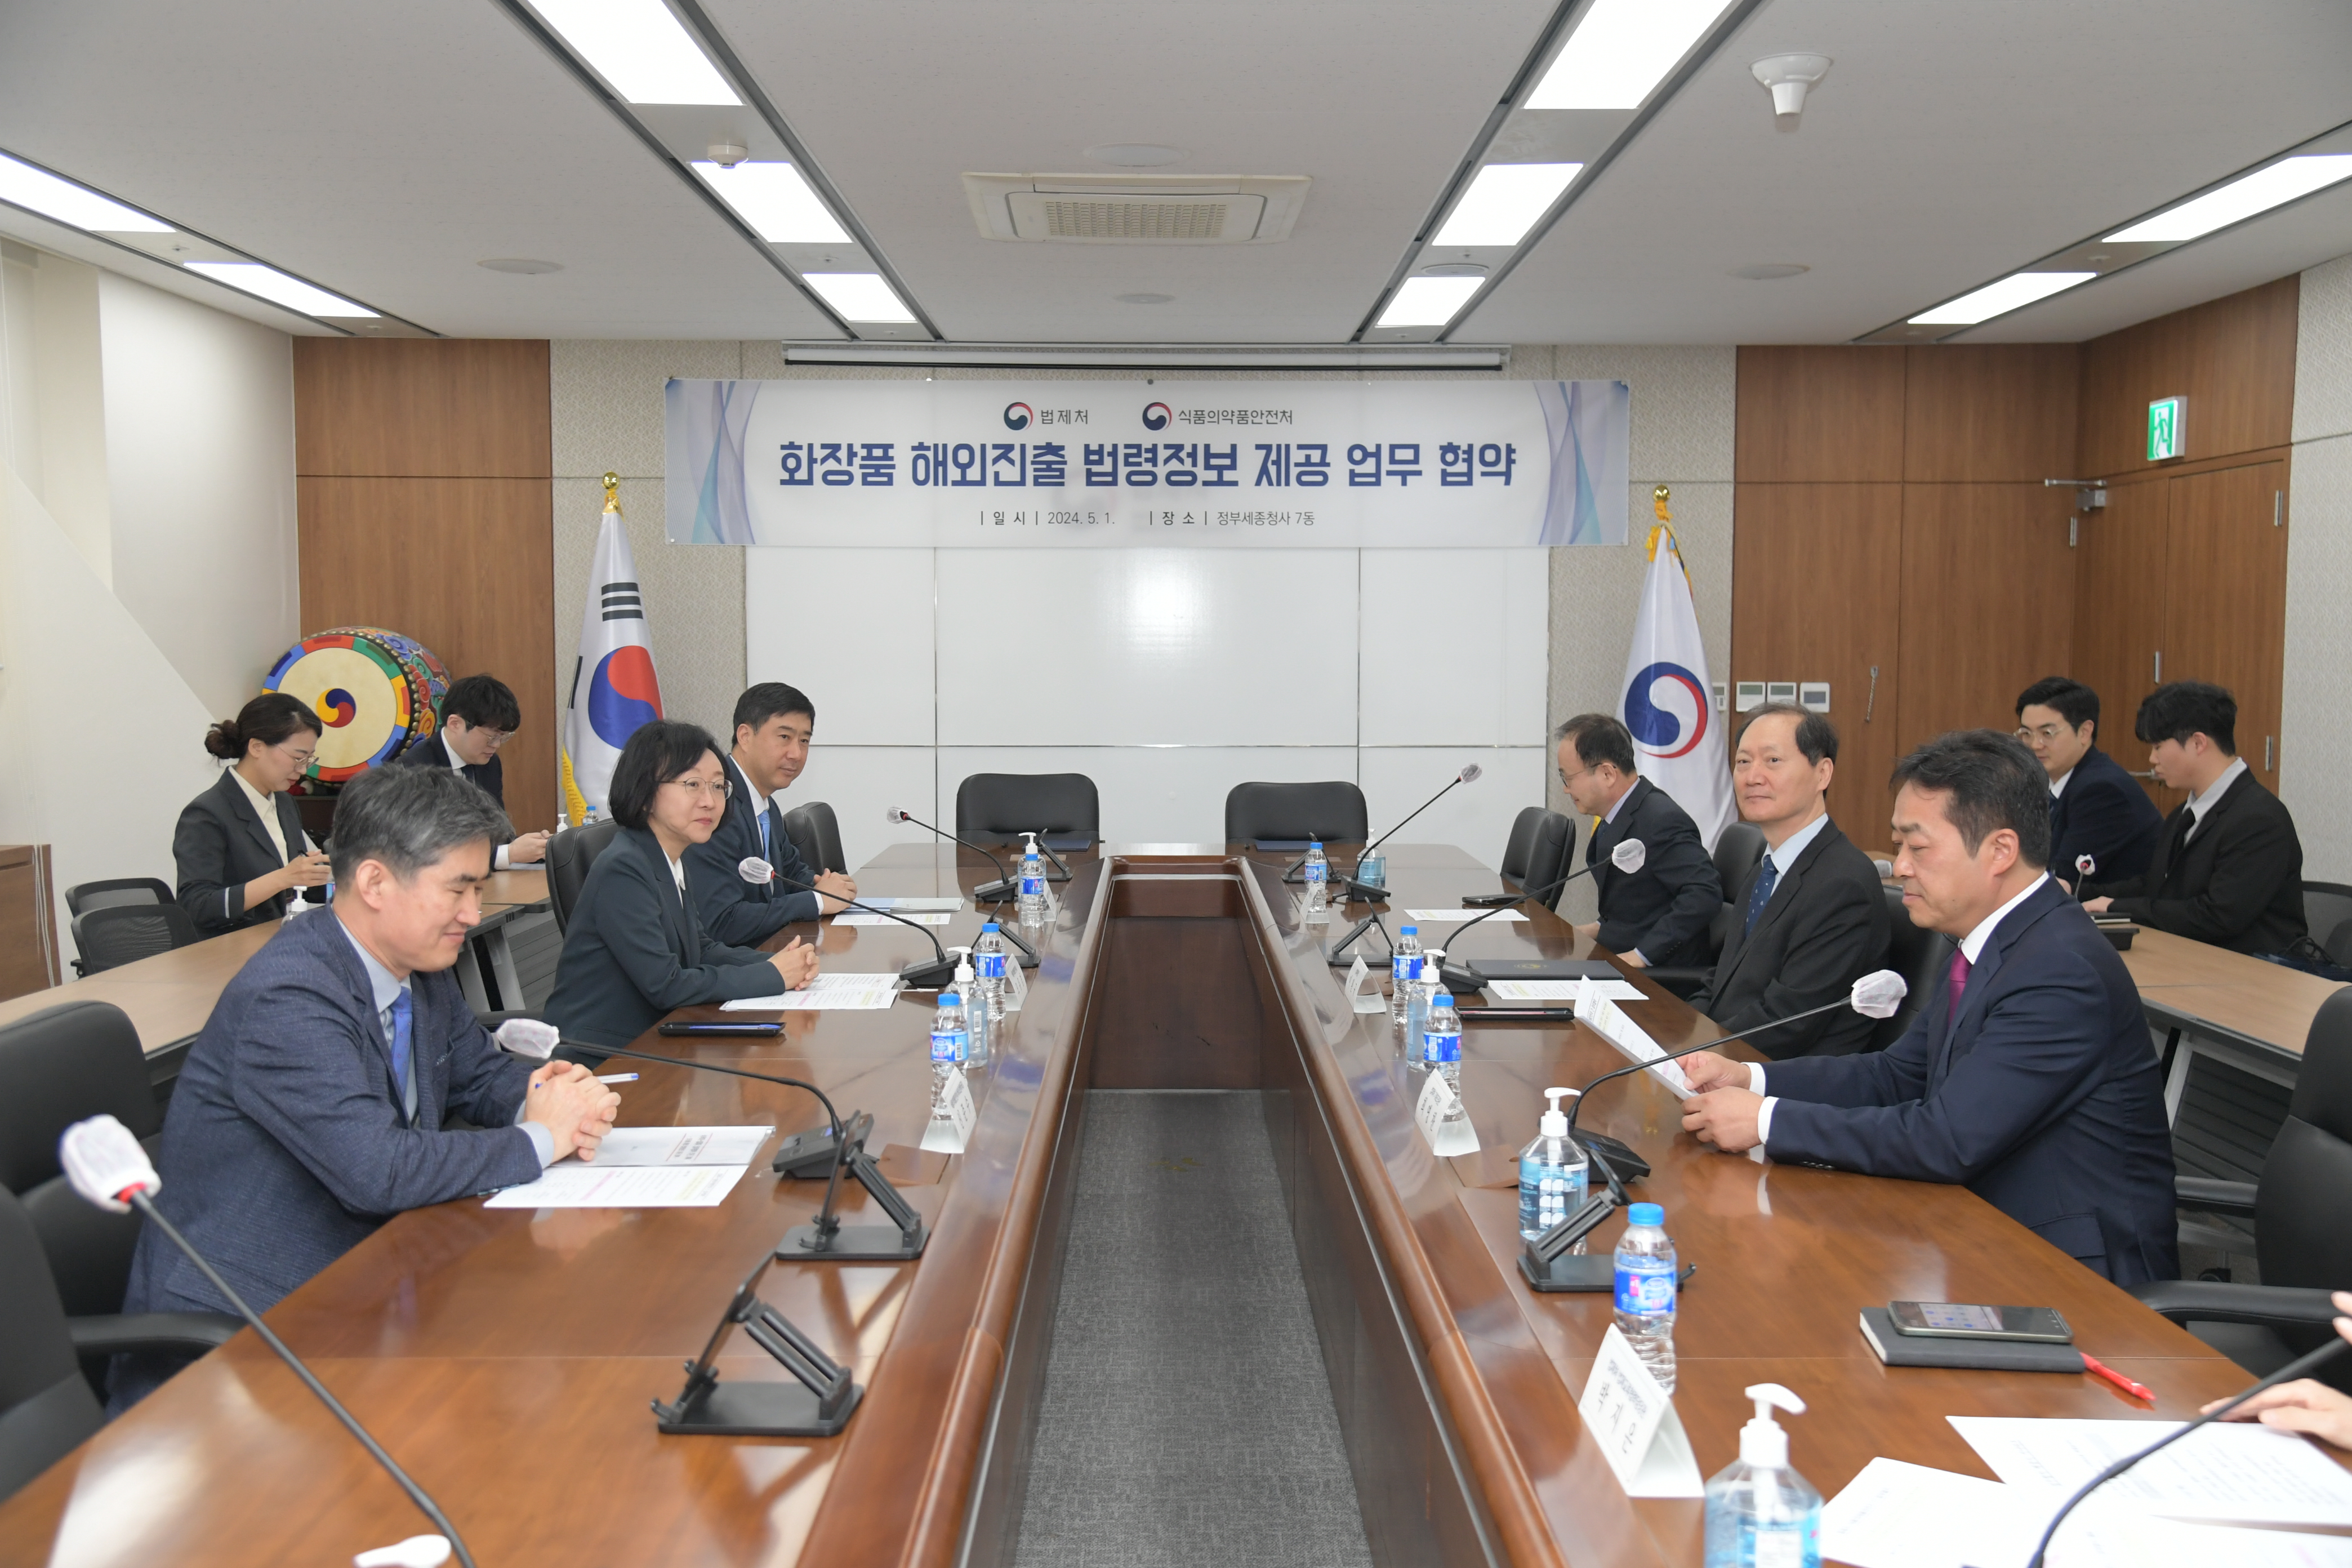 Photo News1 - Ministry of Food and Drug Safety and Ministry of Government Legislation, signing ceremony for ‘Agreement to provide legal information for overseas expansion of cosmetics’